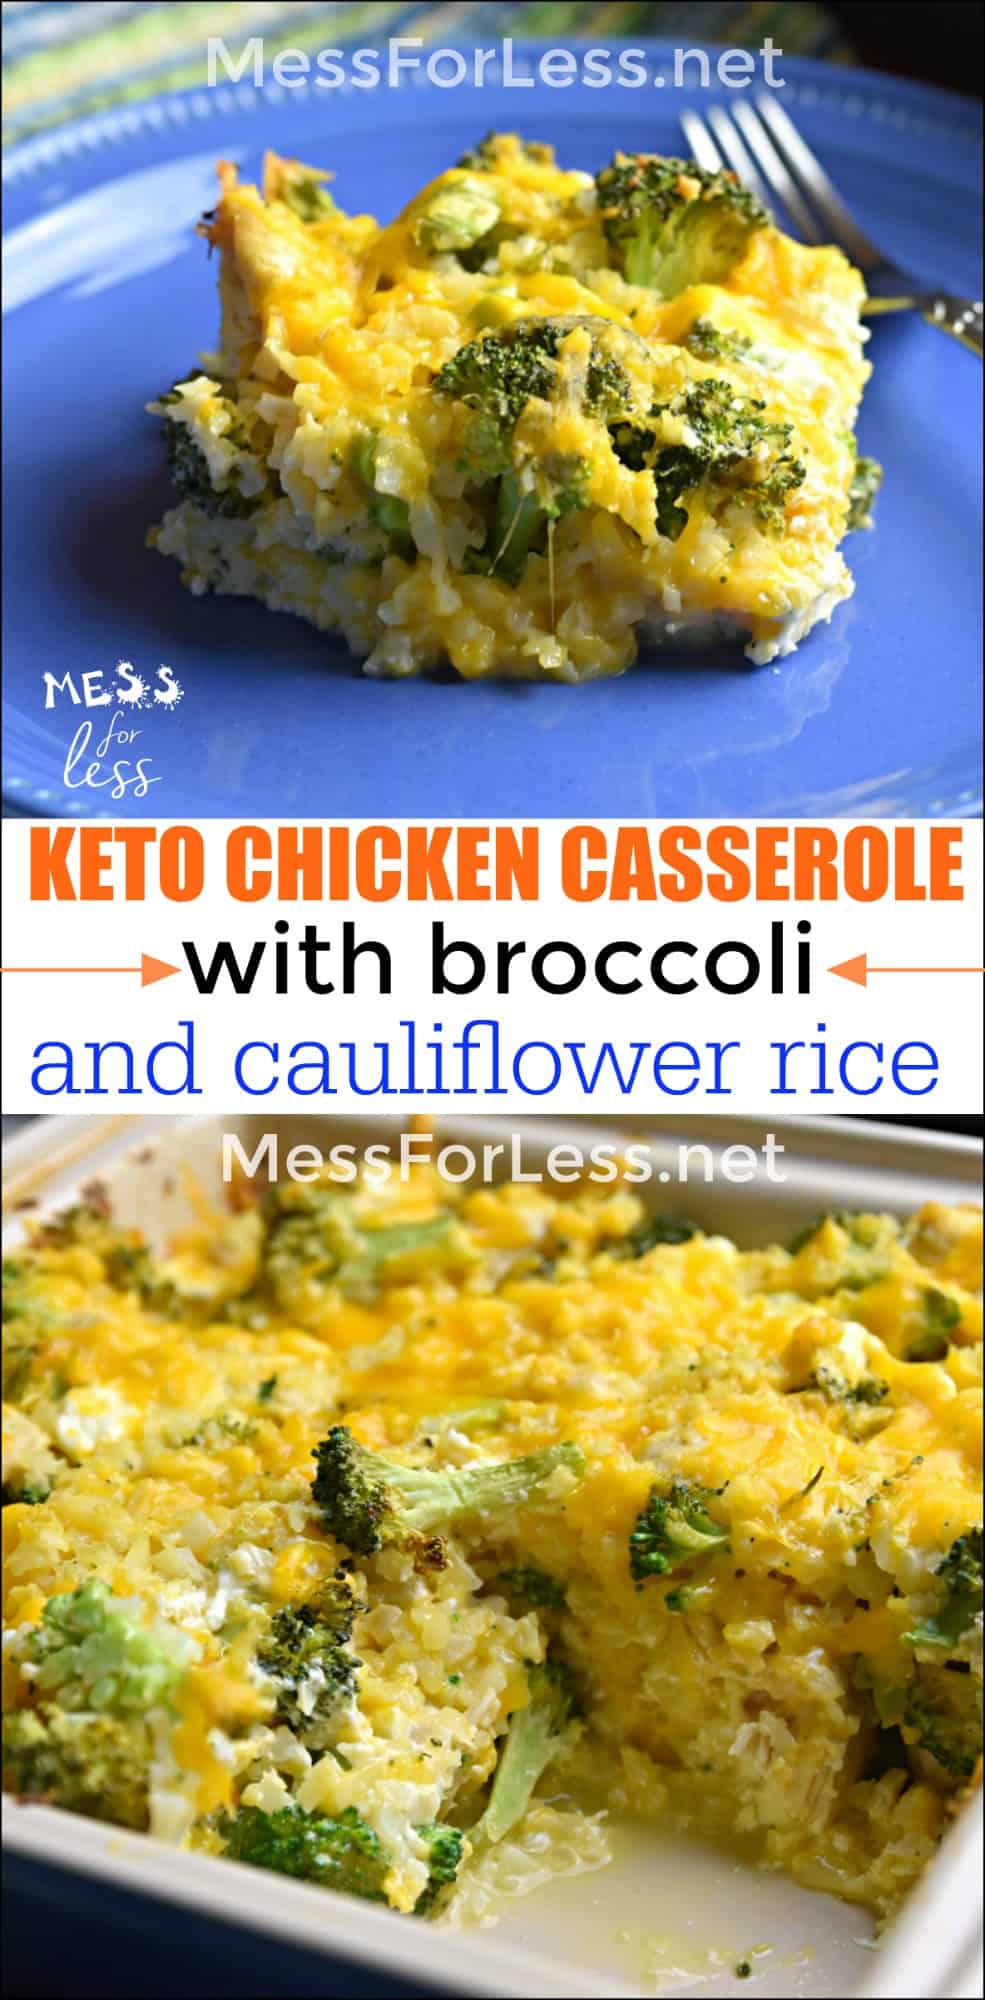 We loved this Keto Chicken Broccoli Casserole with Cauliflower. If you love broccoli and rice casserole, but hate the carbs, try this cheesy dish! 